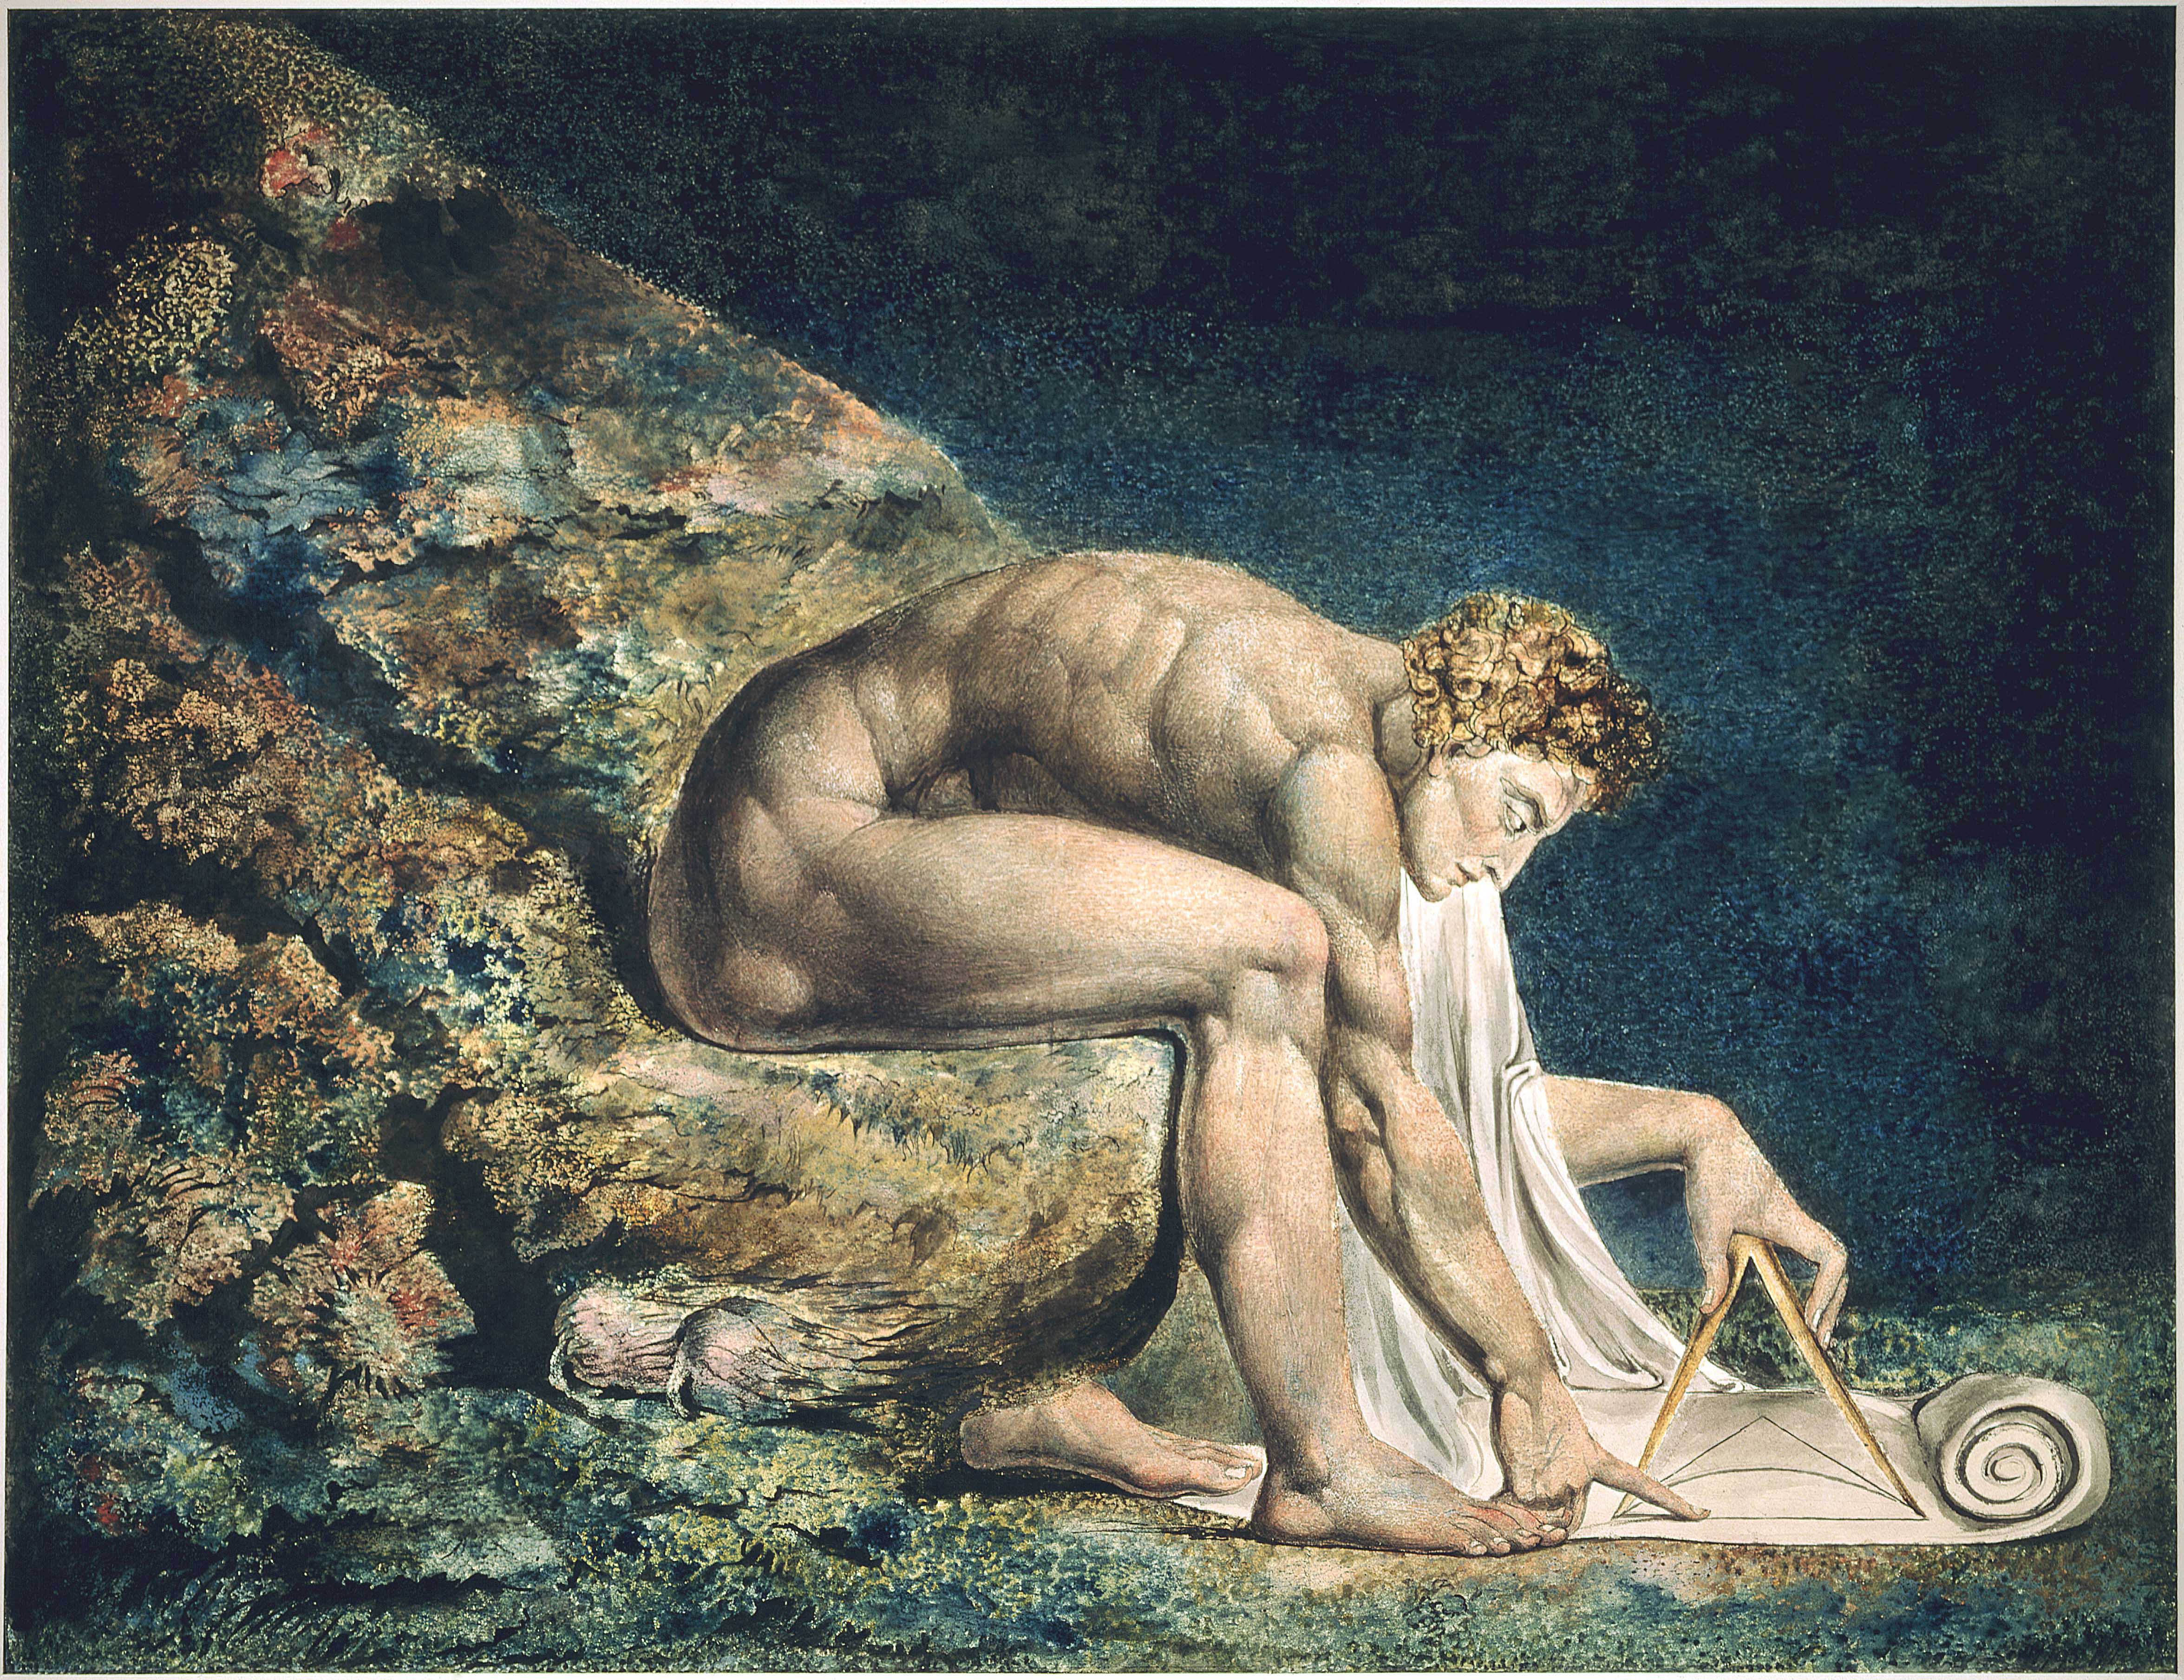 //Newton// by William Blake, 1795. From the Tate Britain Collection.